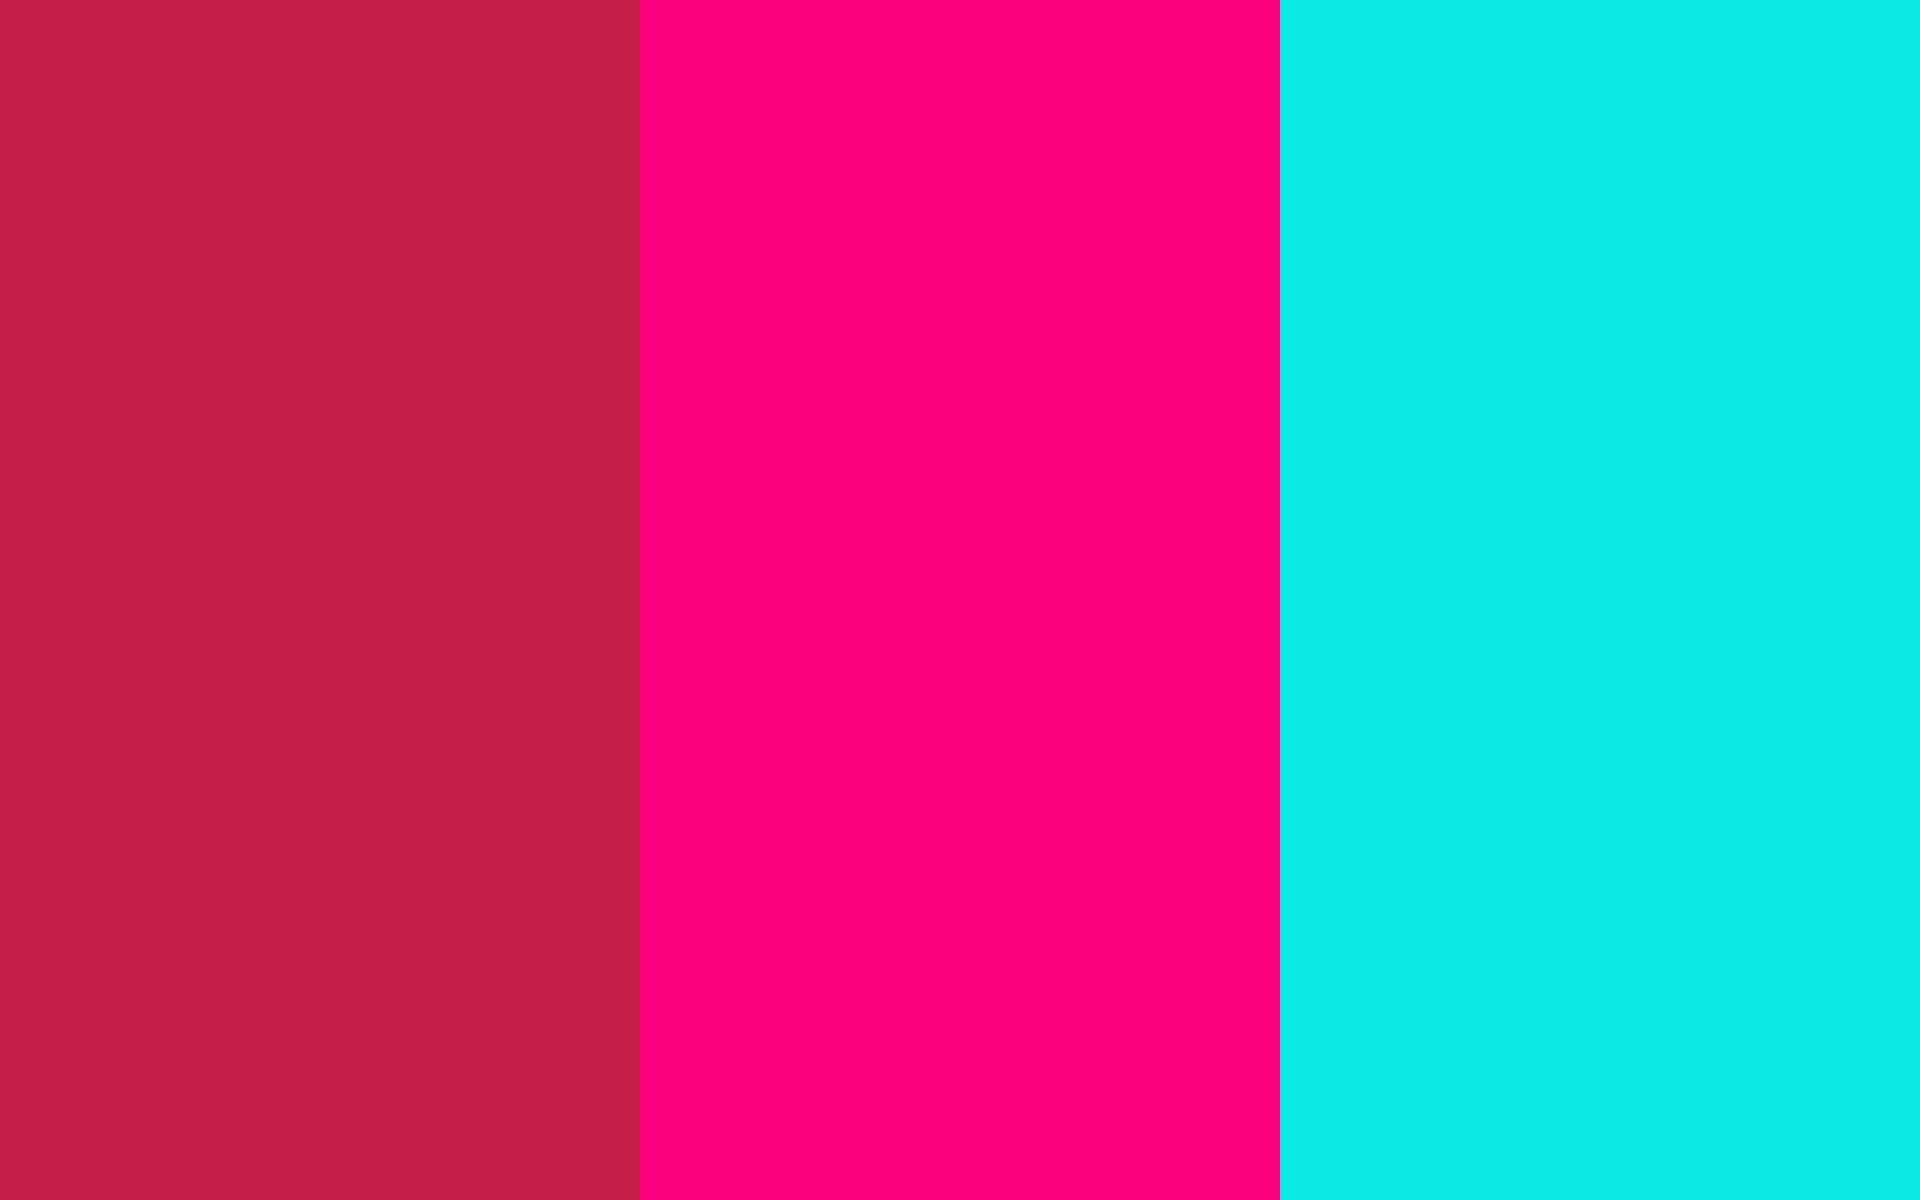 1920x1200 Bright Maroon Bright Pink and Bright Turquoise Three Color